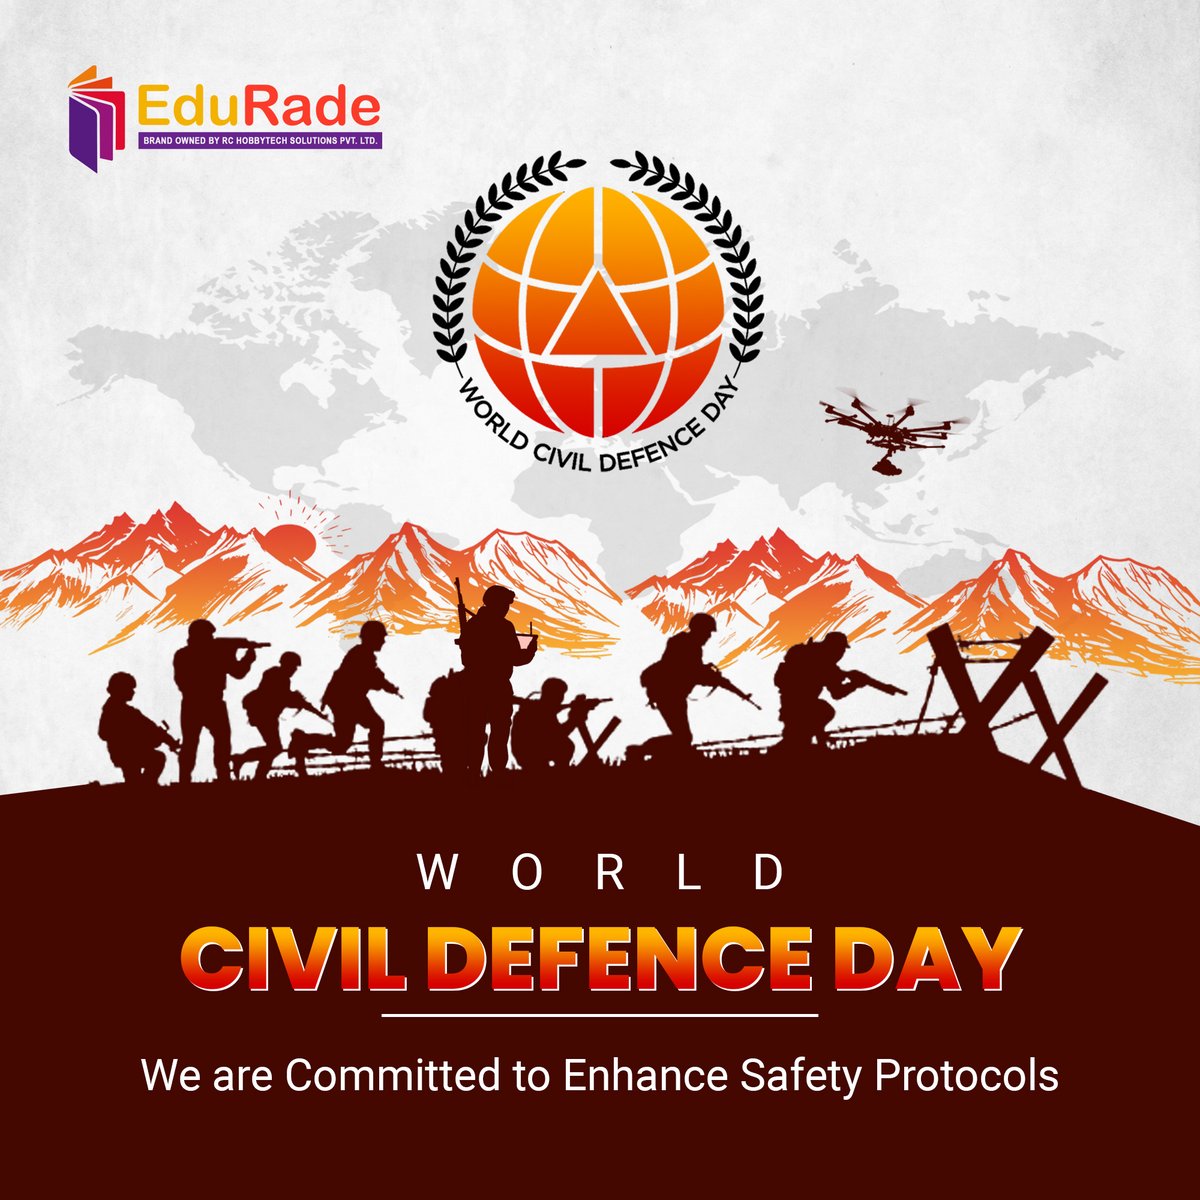 Today, on #World_Civil_Defence_Day, we join hands to promote safety skills for sustainable development.

Join us in advocating for safety education and empowering communities worldwide!

#WorldCivilDefenceDay #SafetySkills #SustainableDevelopment #EduRade #DronePilots #Safety